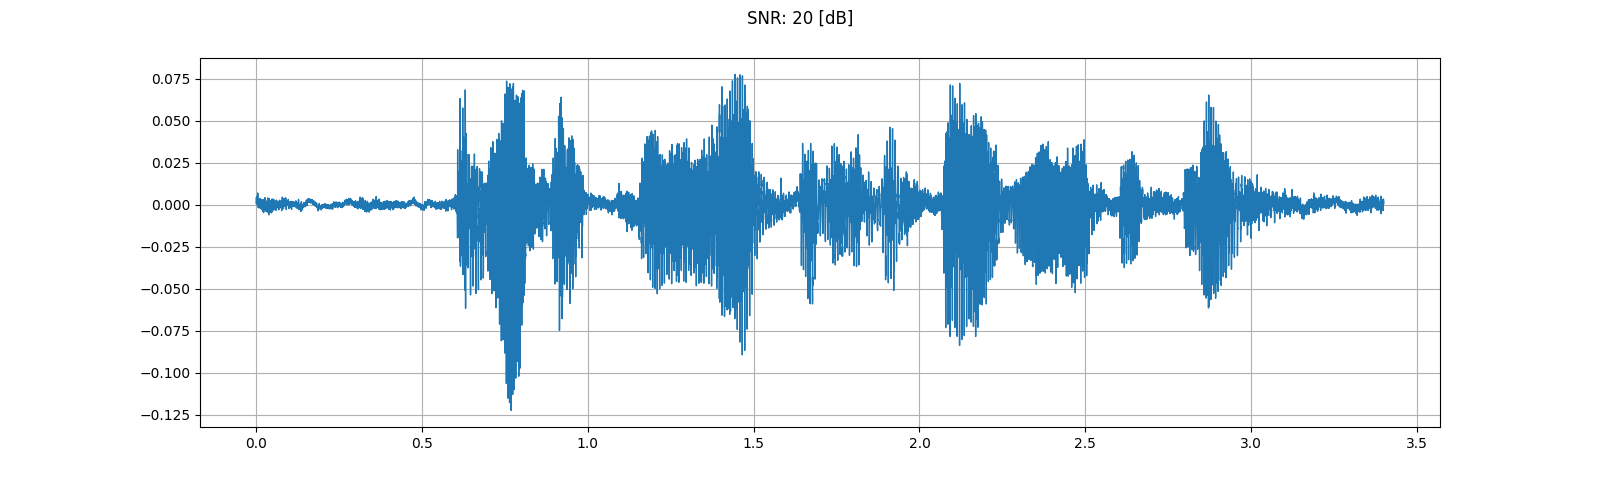 ../_images/sphx_glr_audio_preprocessing_tutorial_031.png